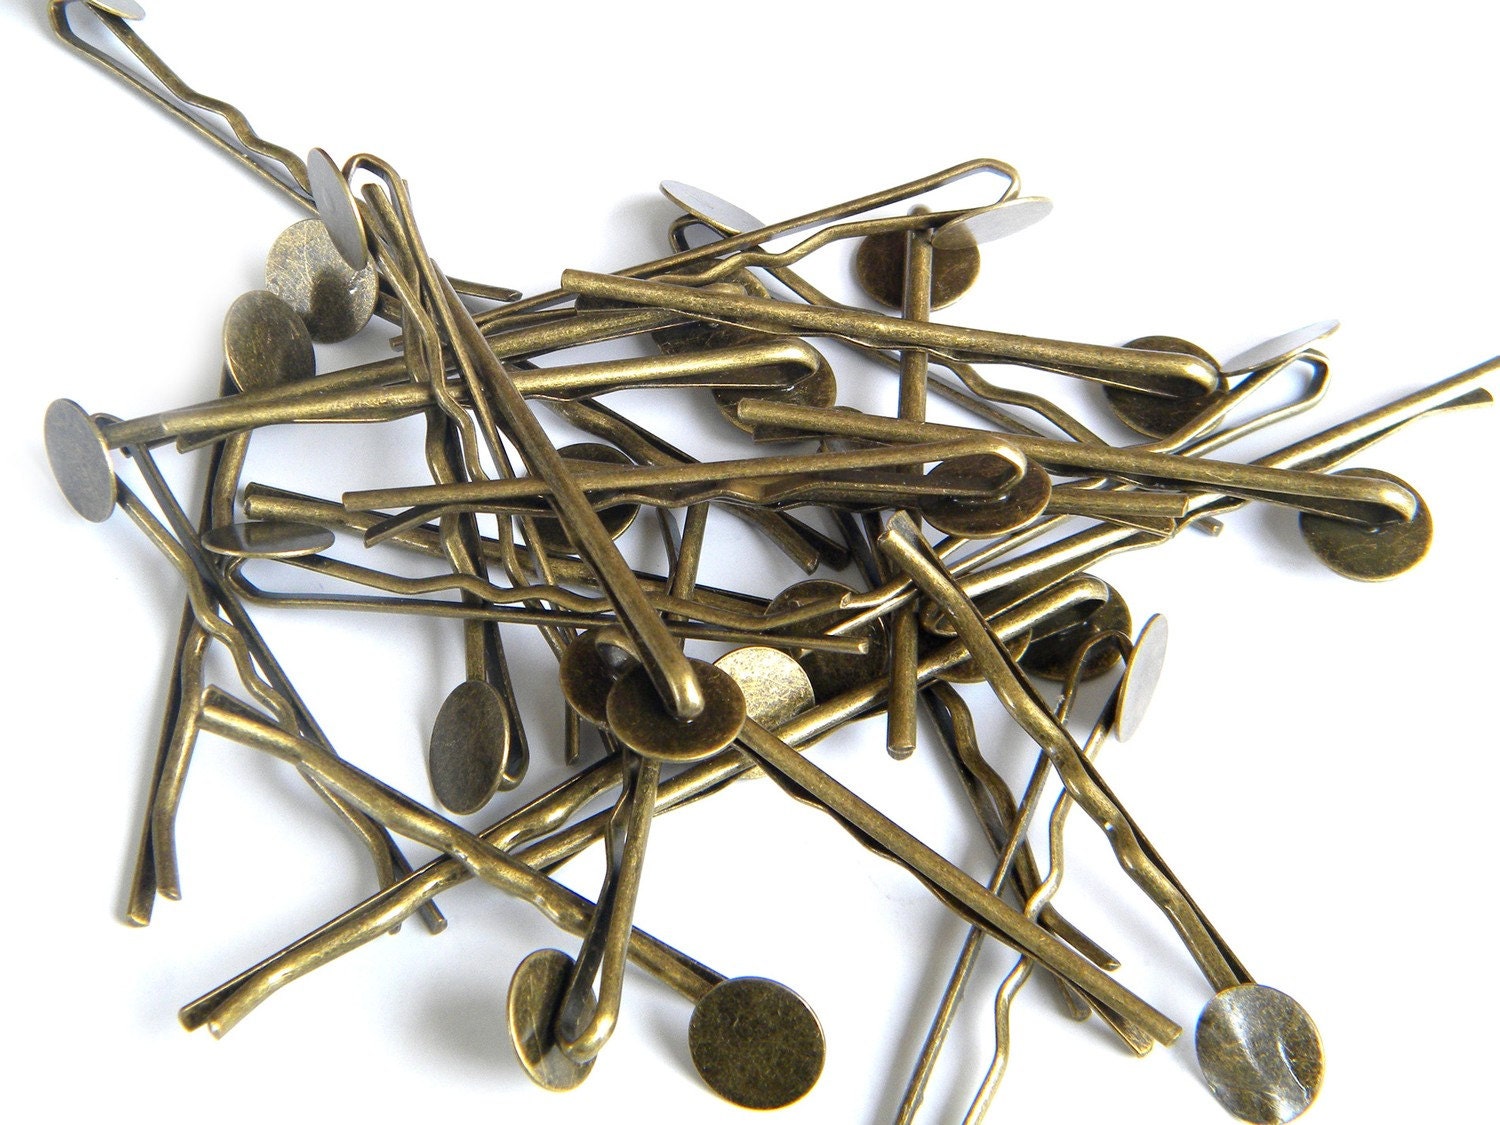 25 Antique Brass Plated Bobby Pins with Gluing Pad